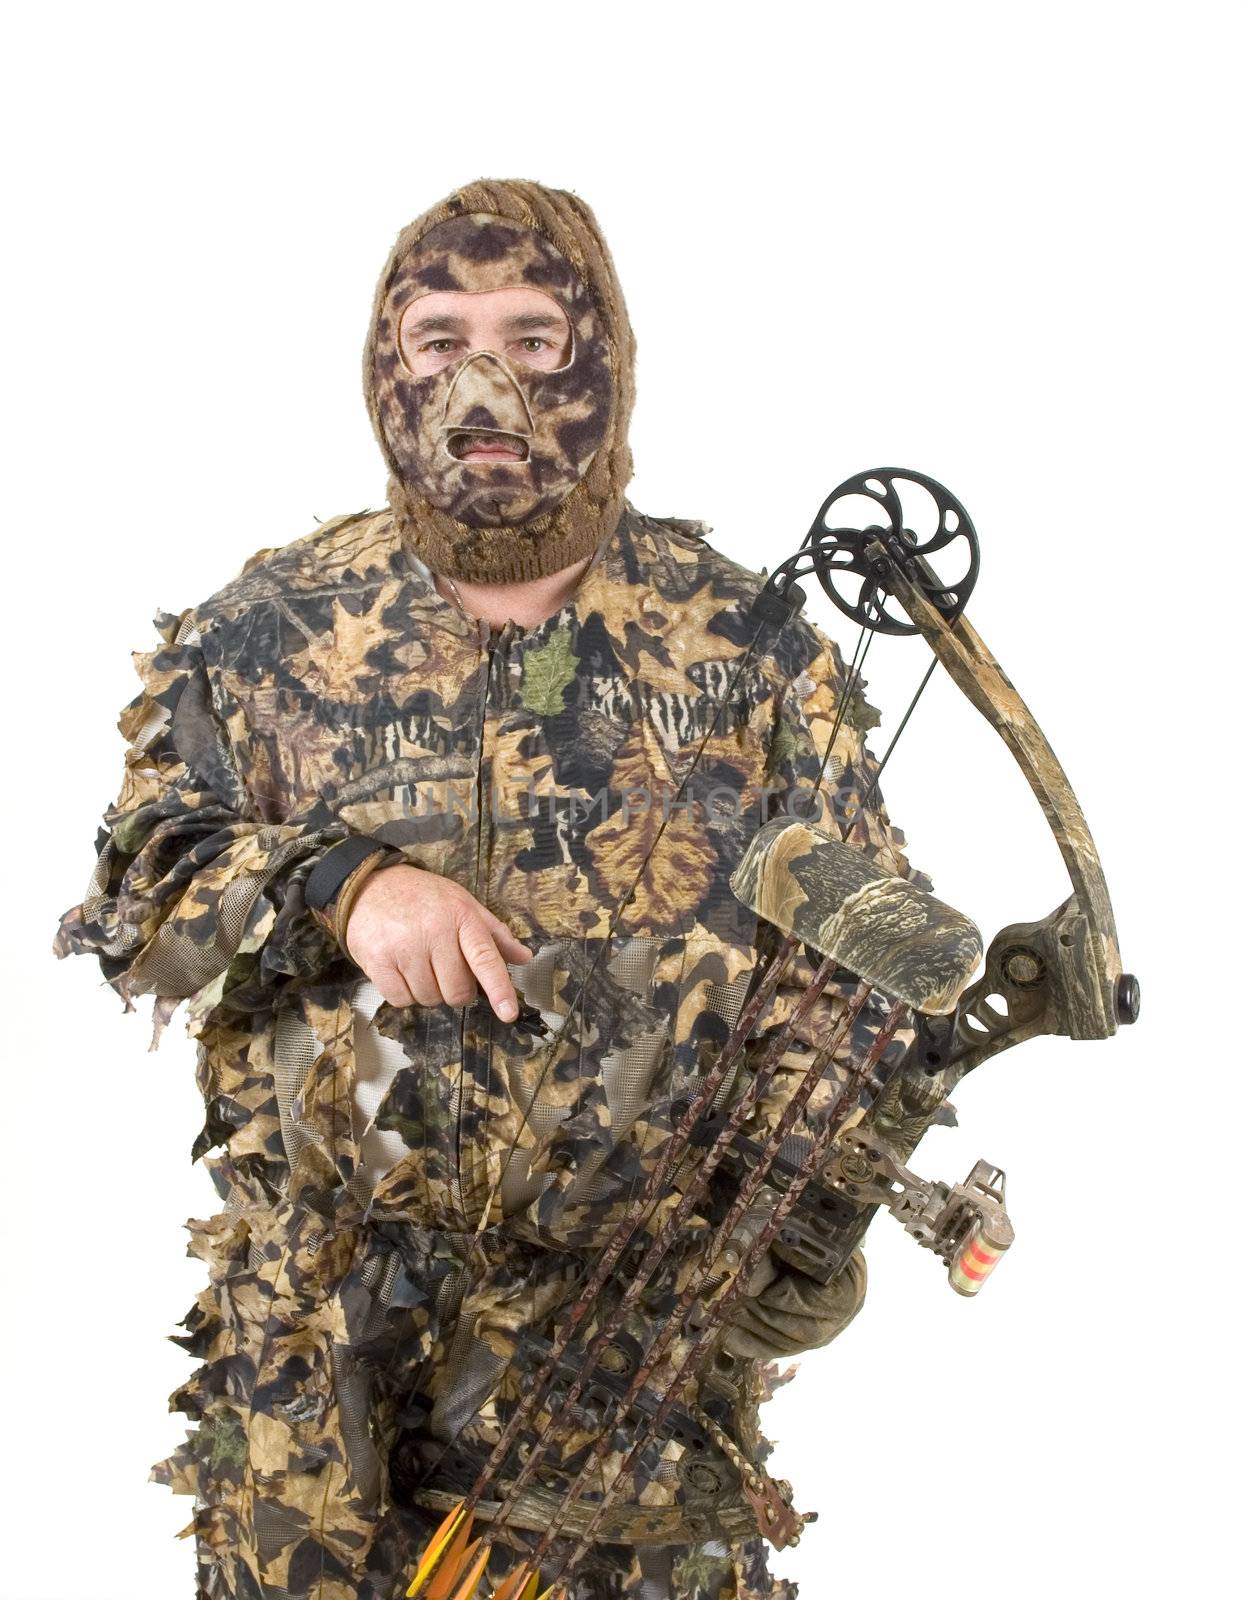 Bowhunter in 3D camo over a white background